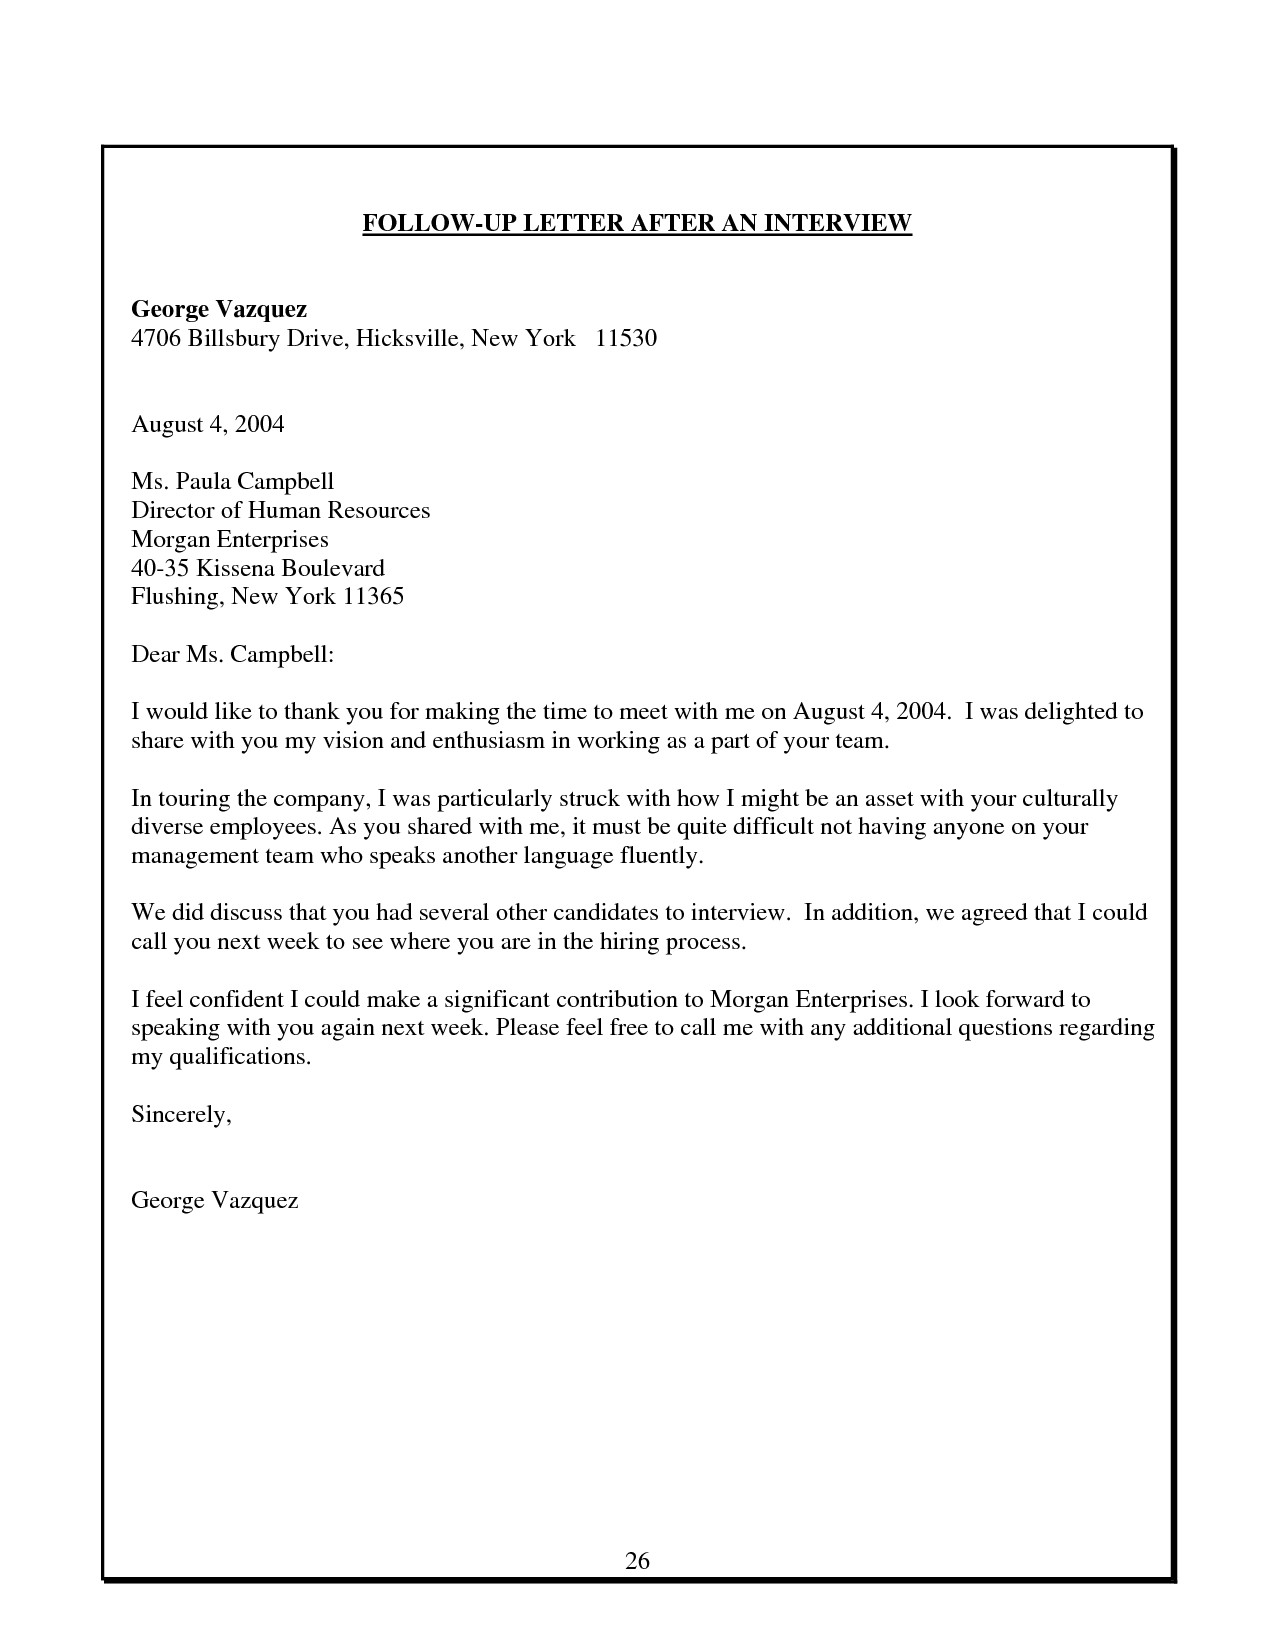 Best Photos Of Follow Up Letter After Interview No Response Document With Job Interviews